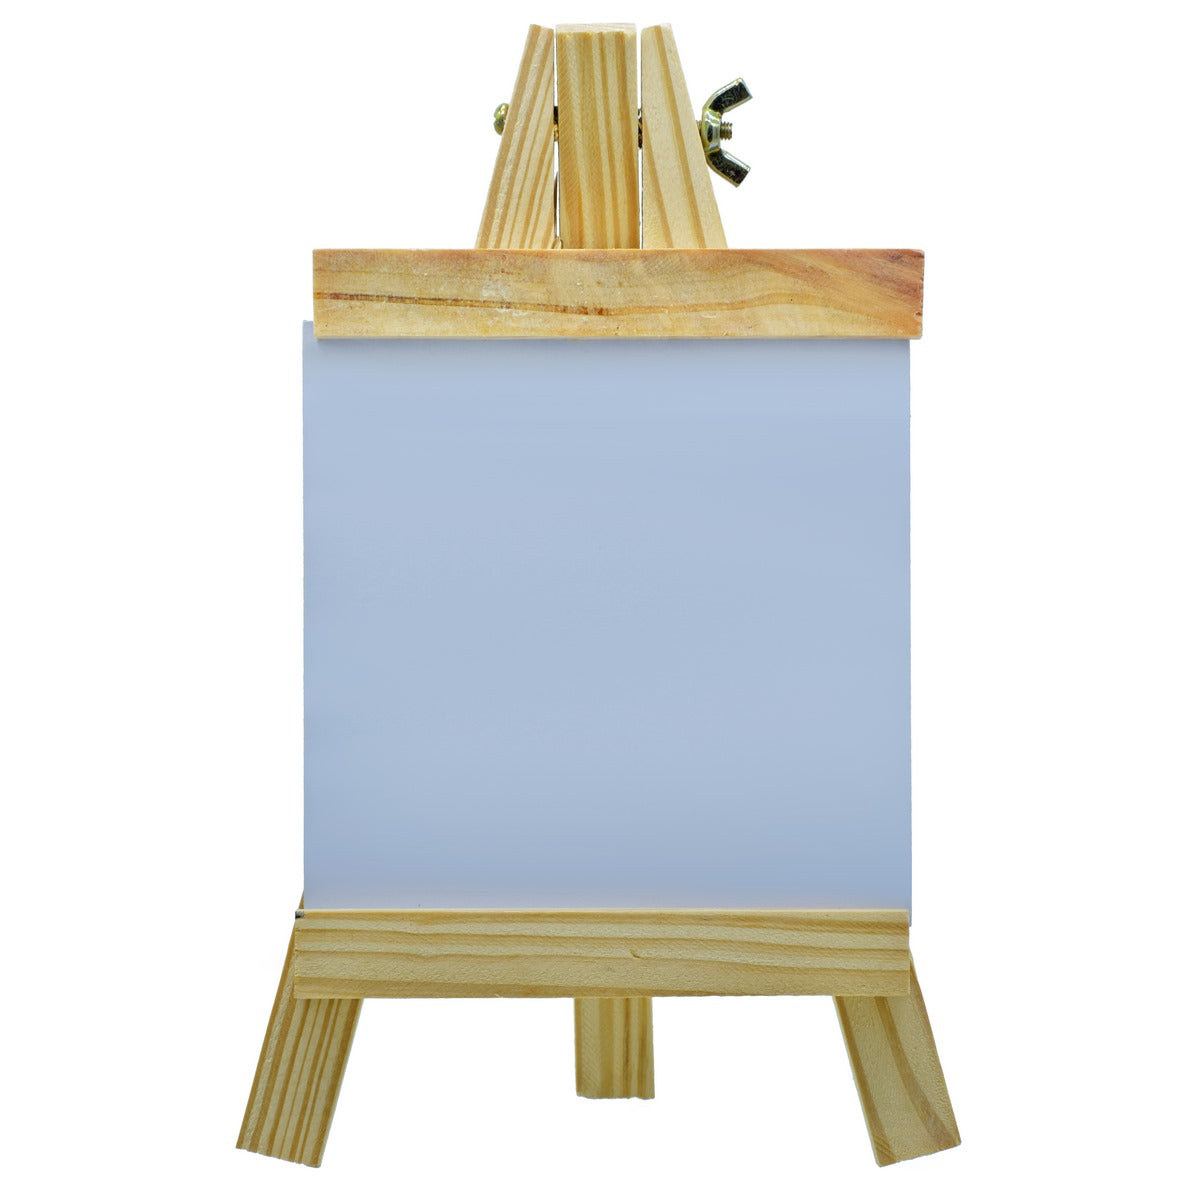 jags-mumbai Easel & Canvas Drawing Board With Easel Stand White 12x23 B-12X23SJ